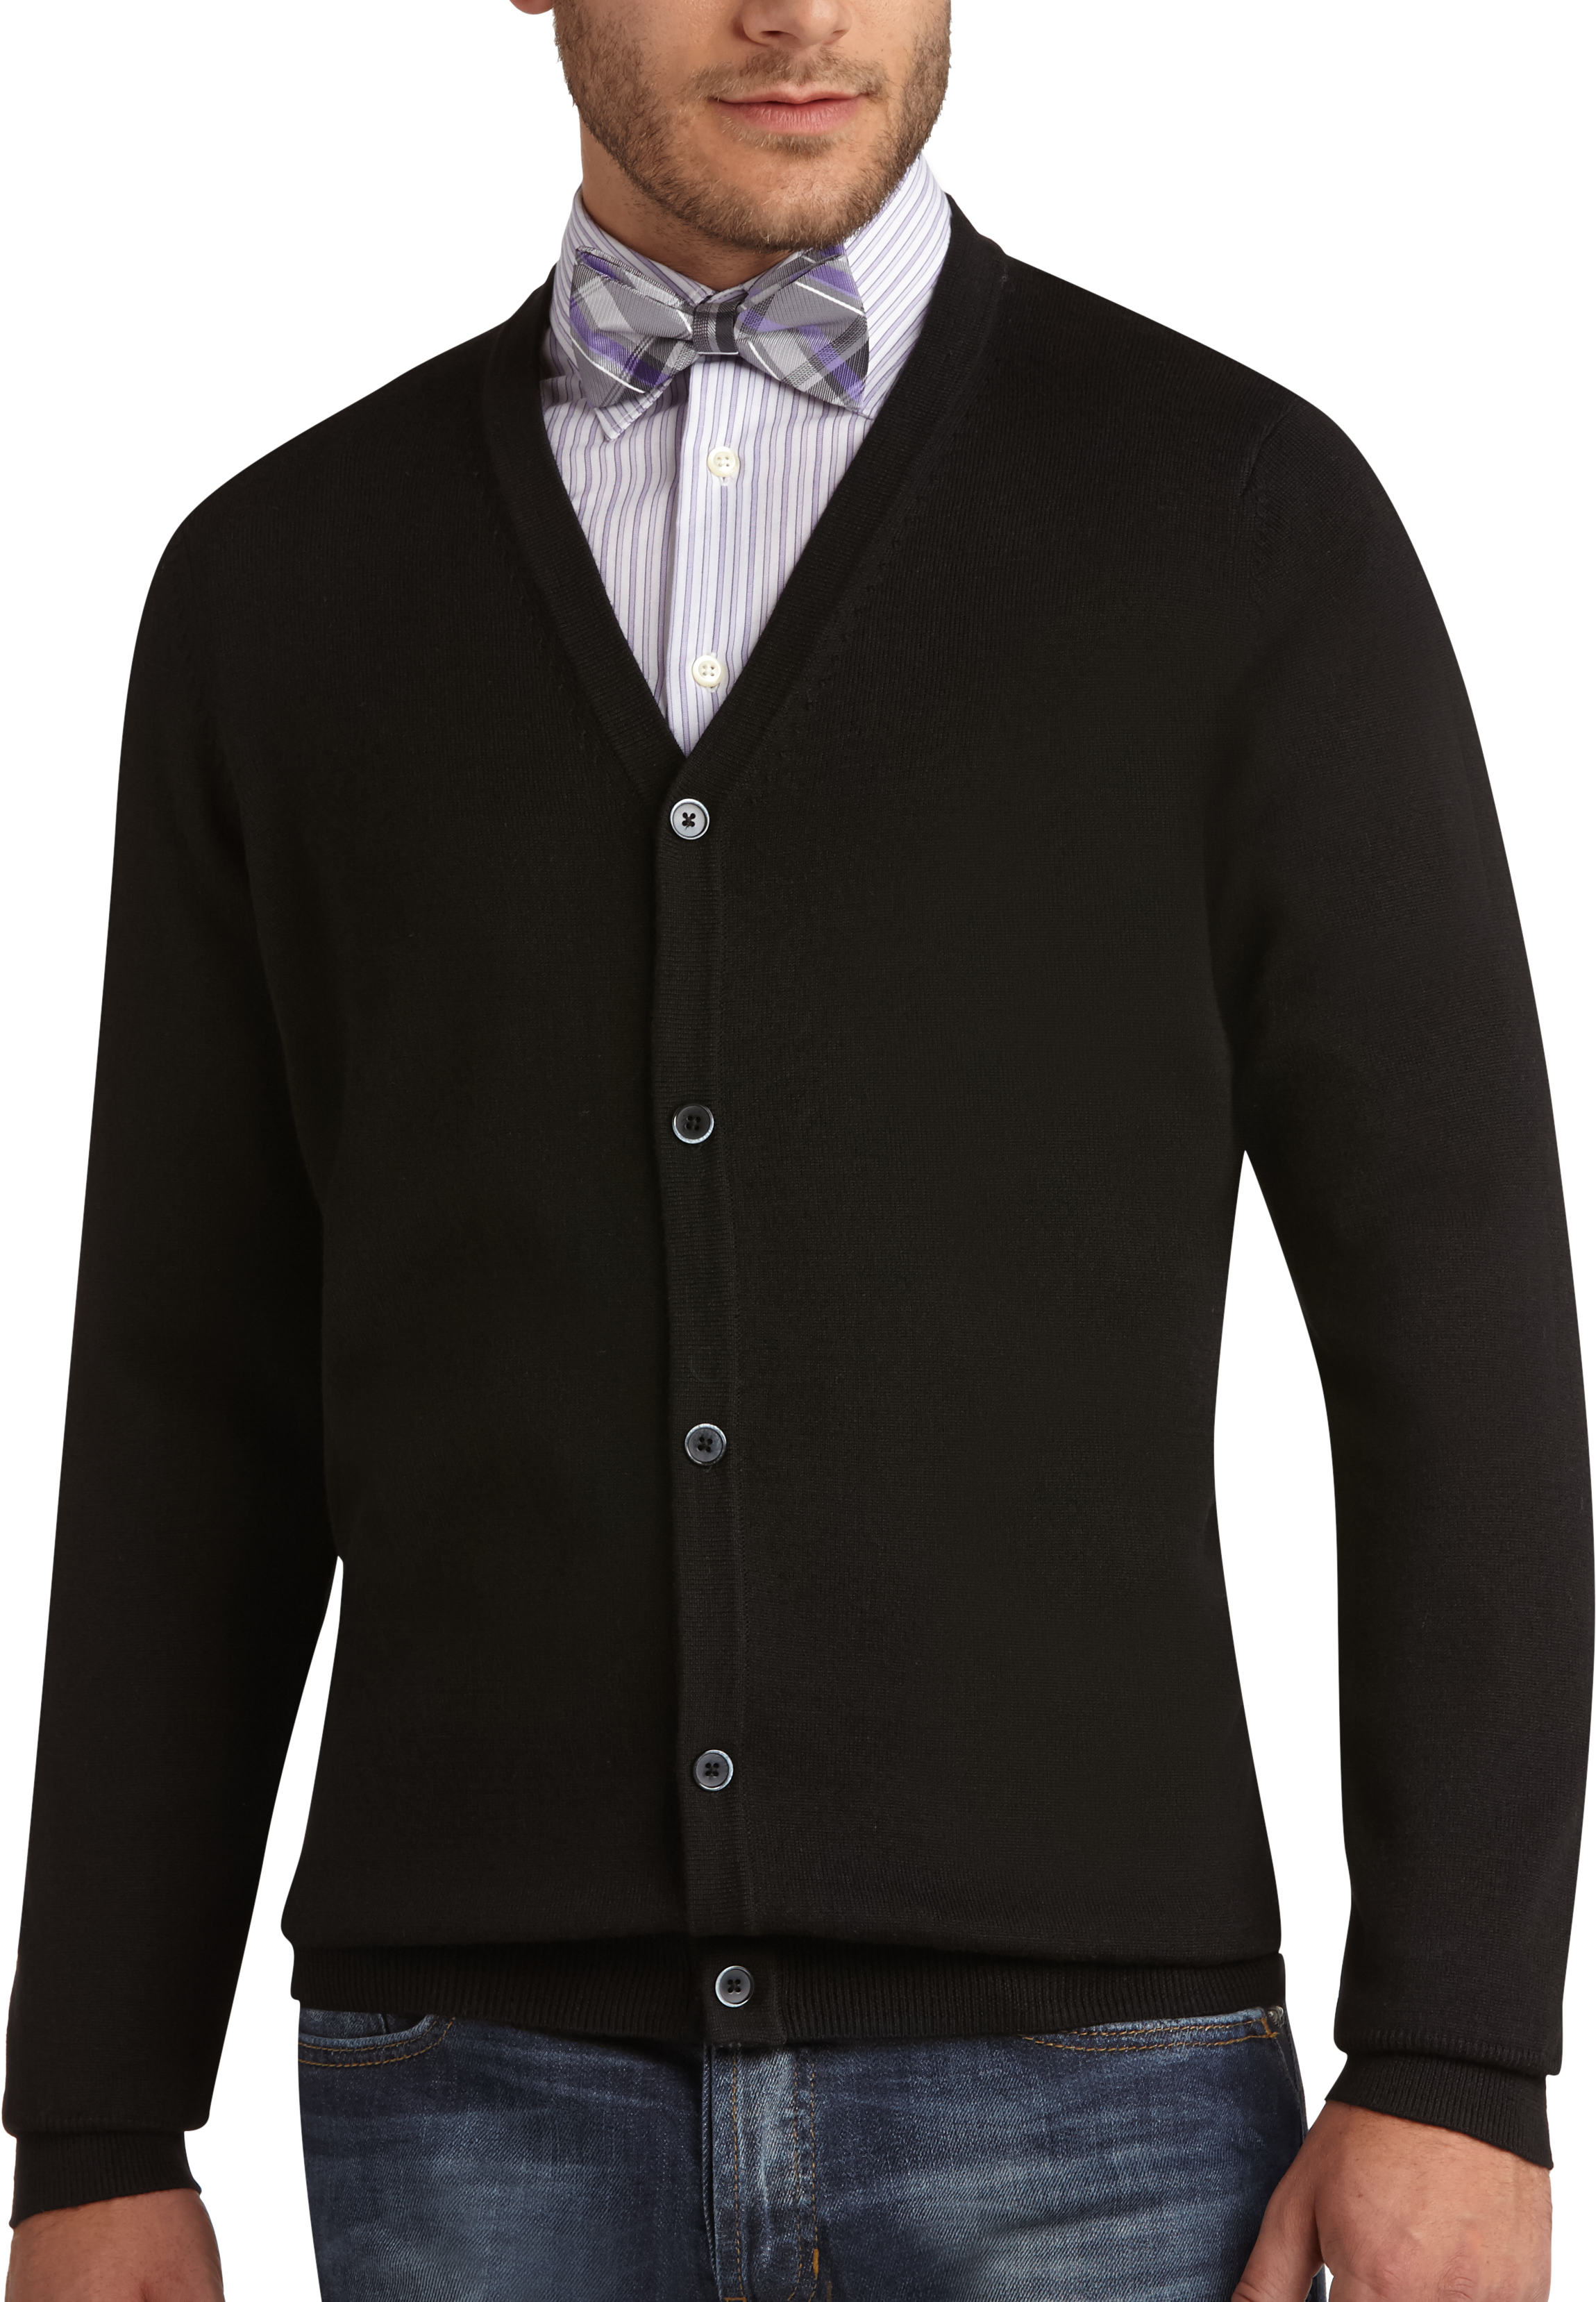 Sweaters & Vests - Outlet | Men's Wearhouse